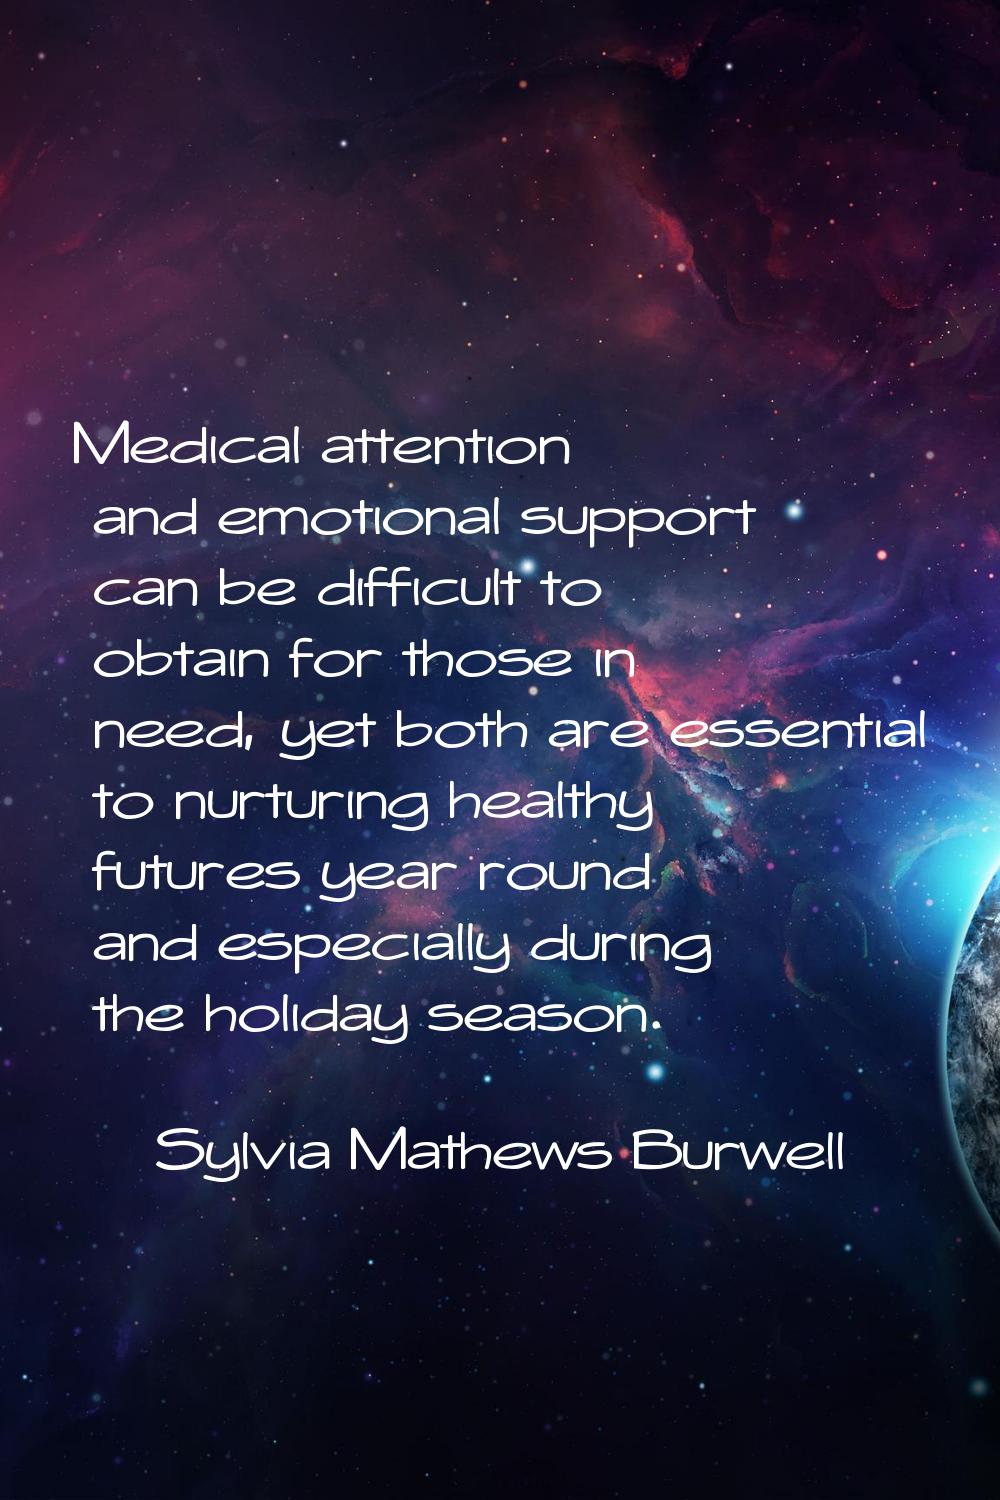 Medical attention and emotional support can be difficult to obtain for those in need, yet both are 